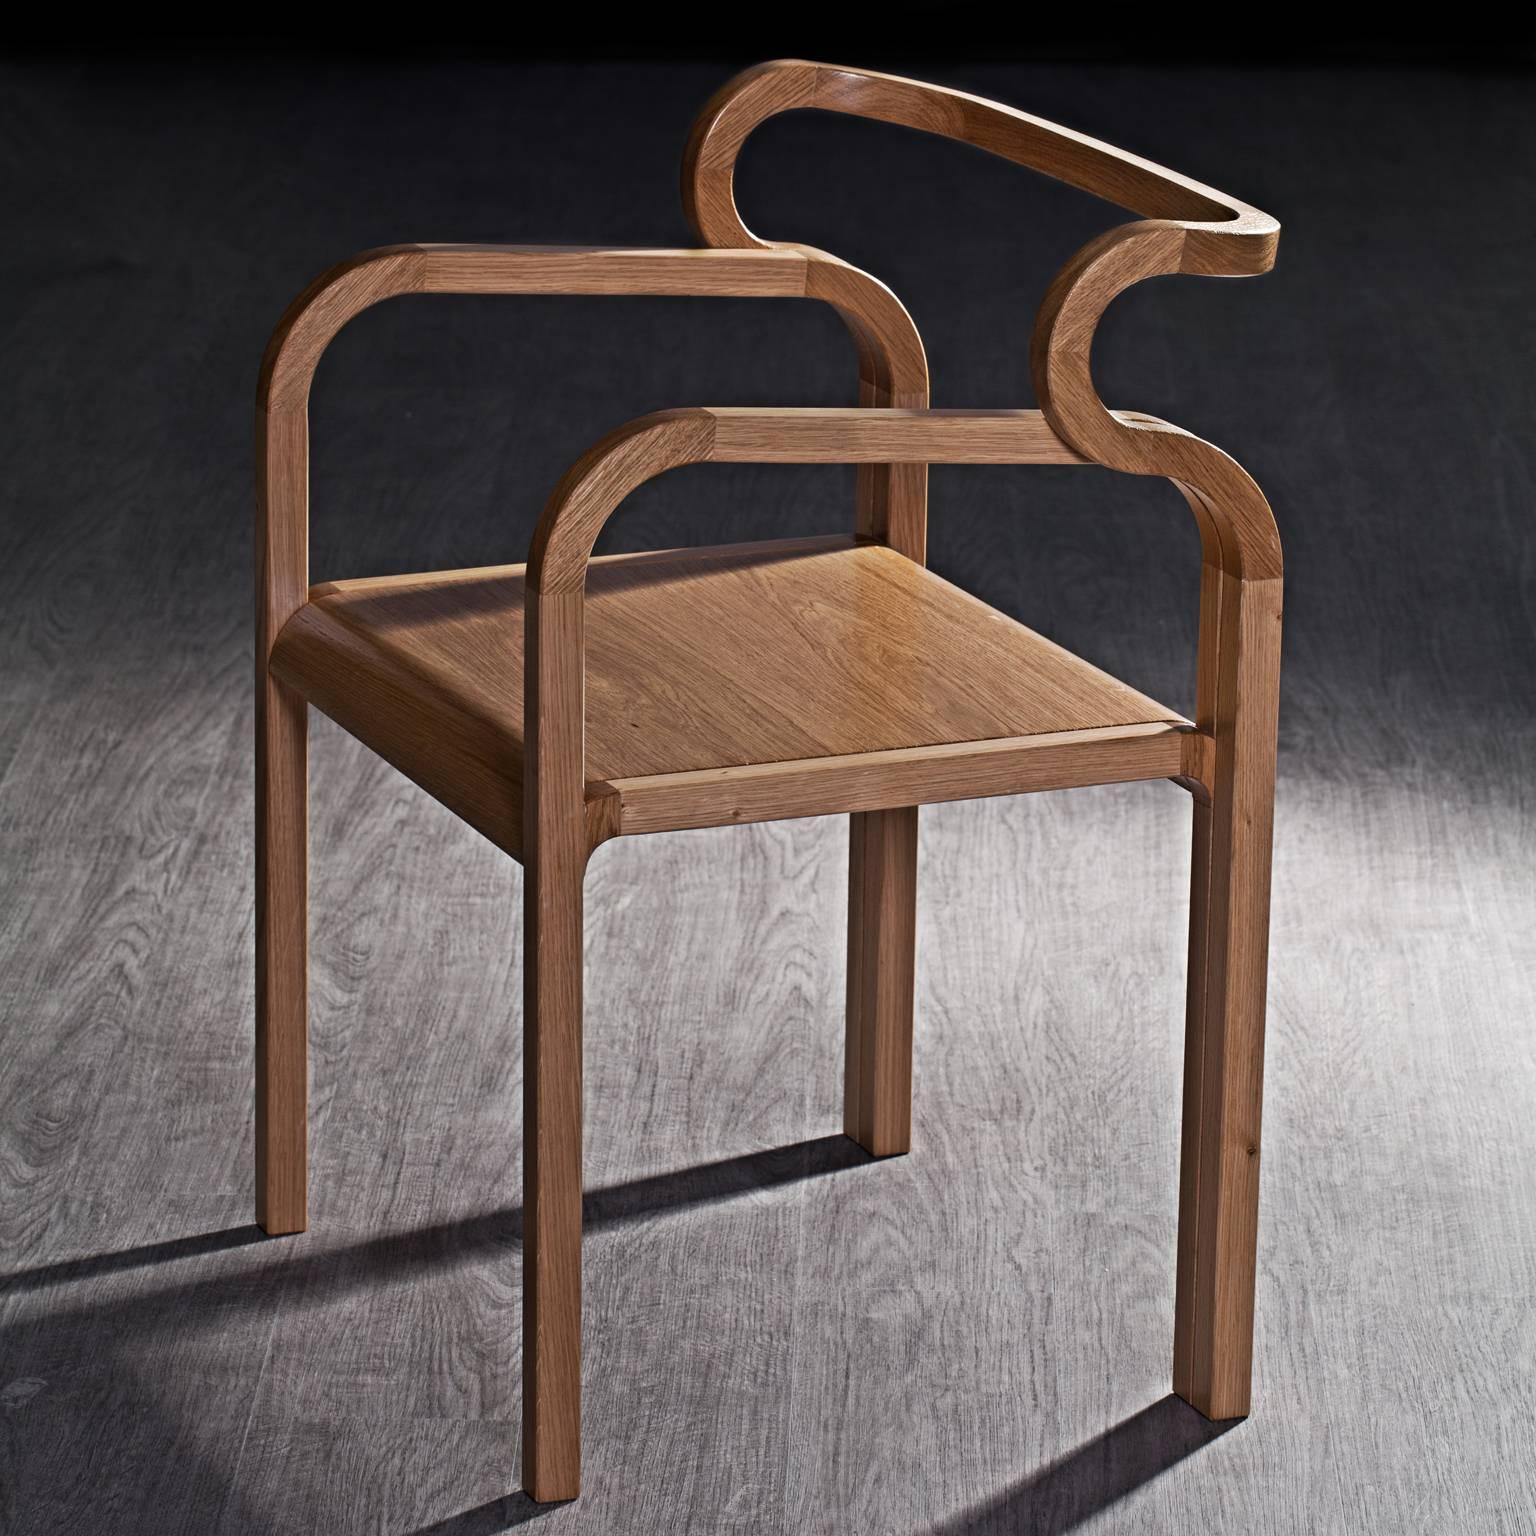 Hand-Crafted Odette Curvy Dining Chair with Armrests in Solid Oak Wood by Fred&Juul For Sale